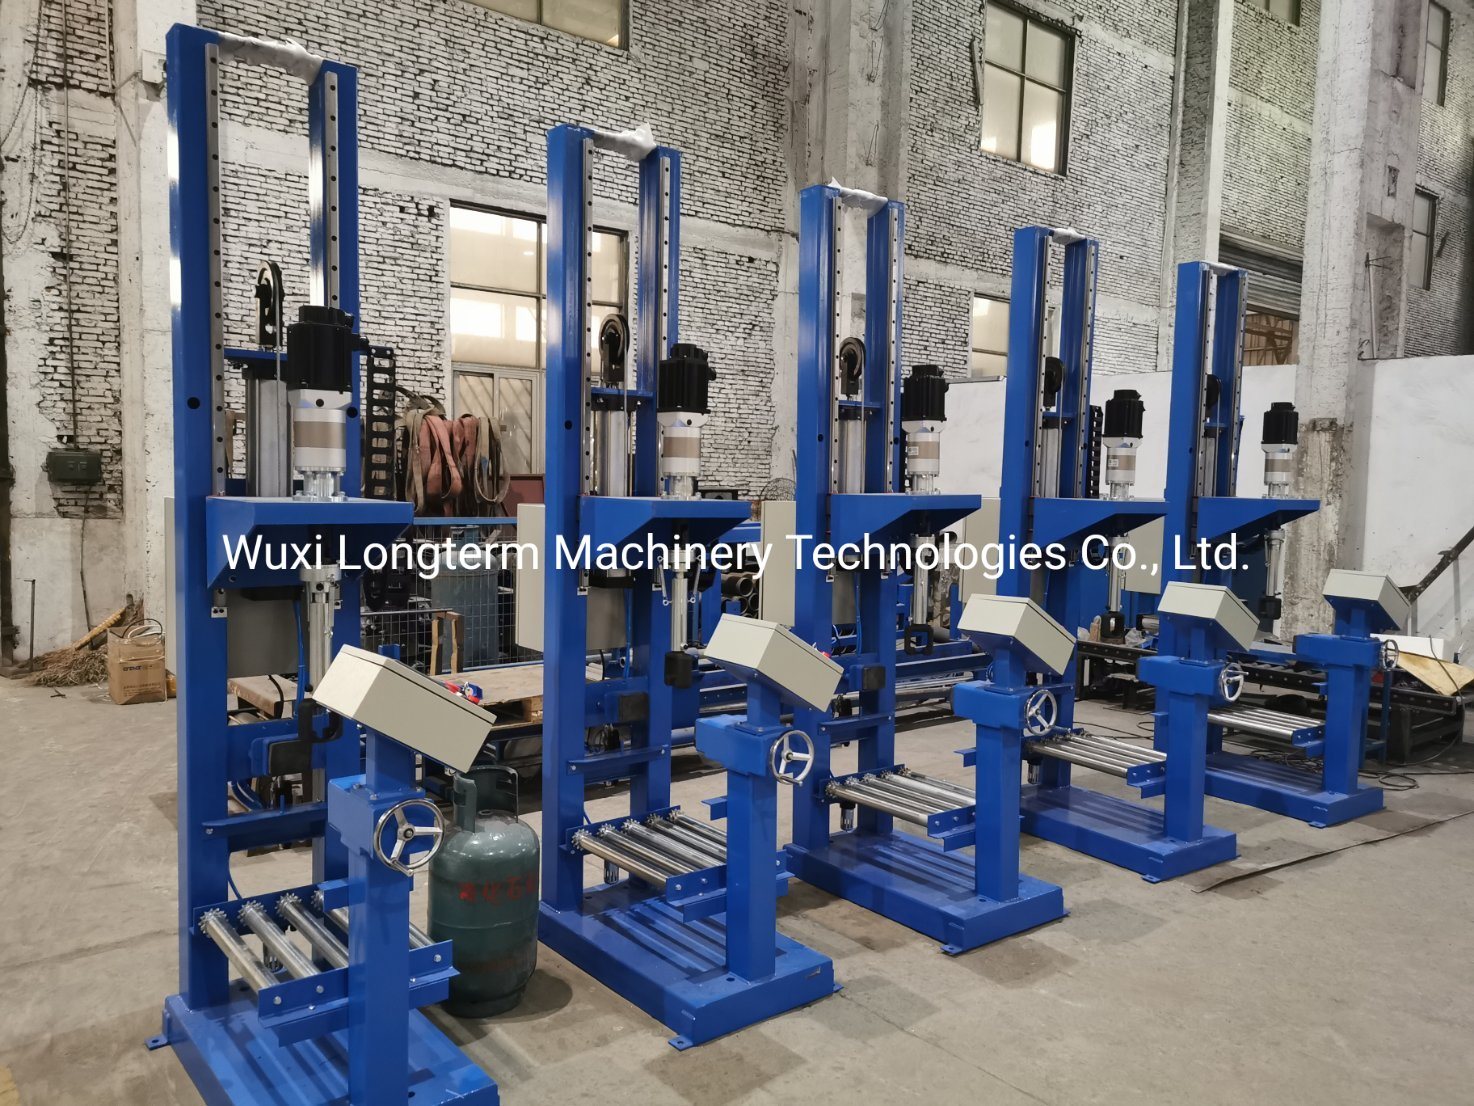 Chinese Top Valve Mounting Machine for Different Sizes